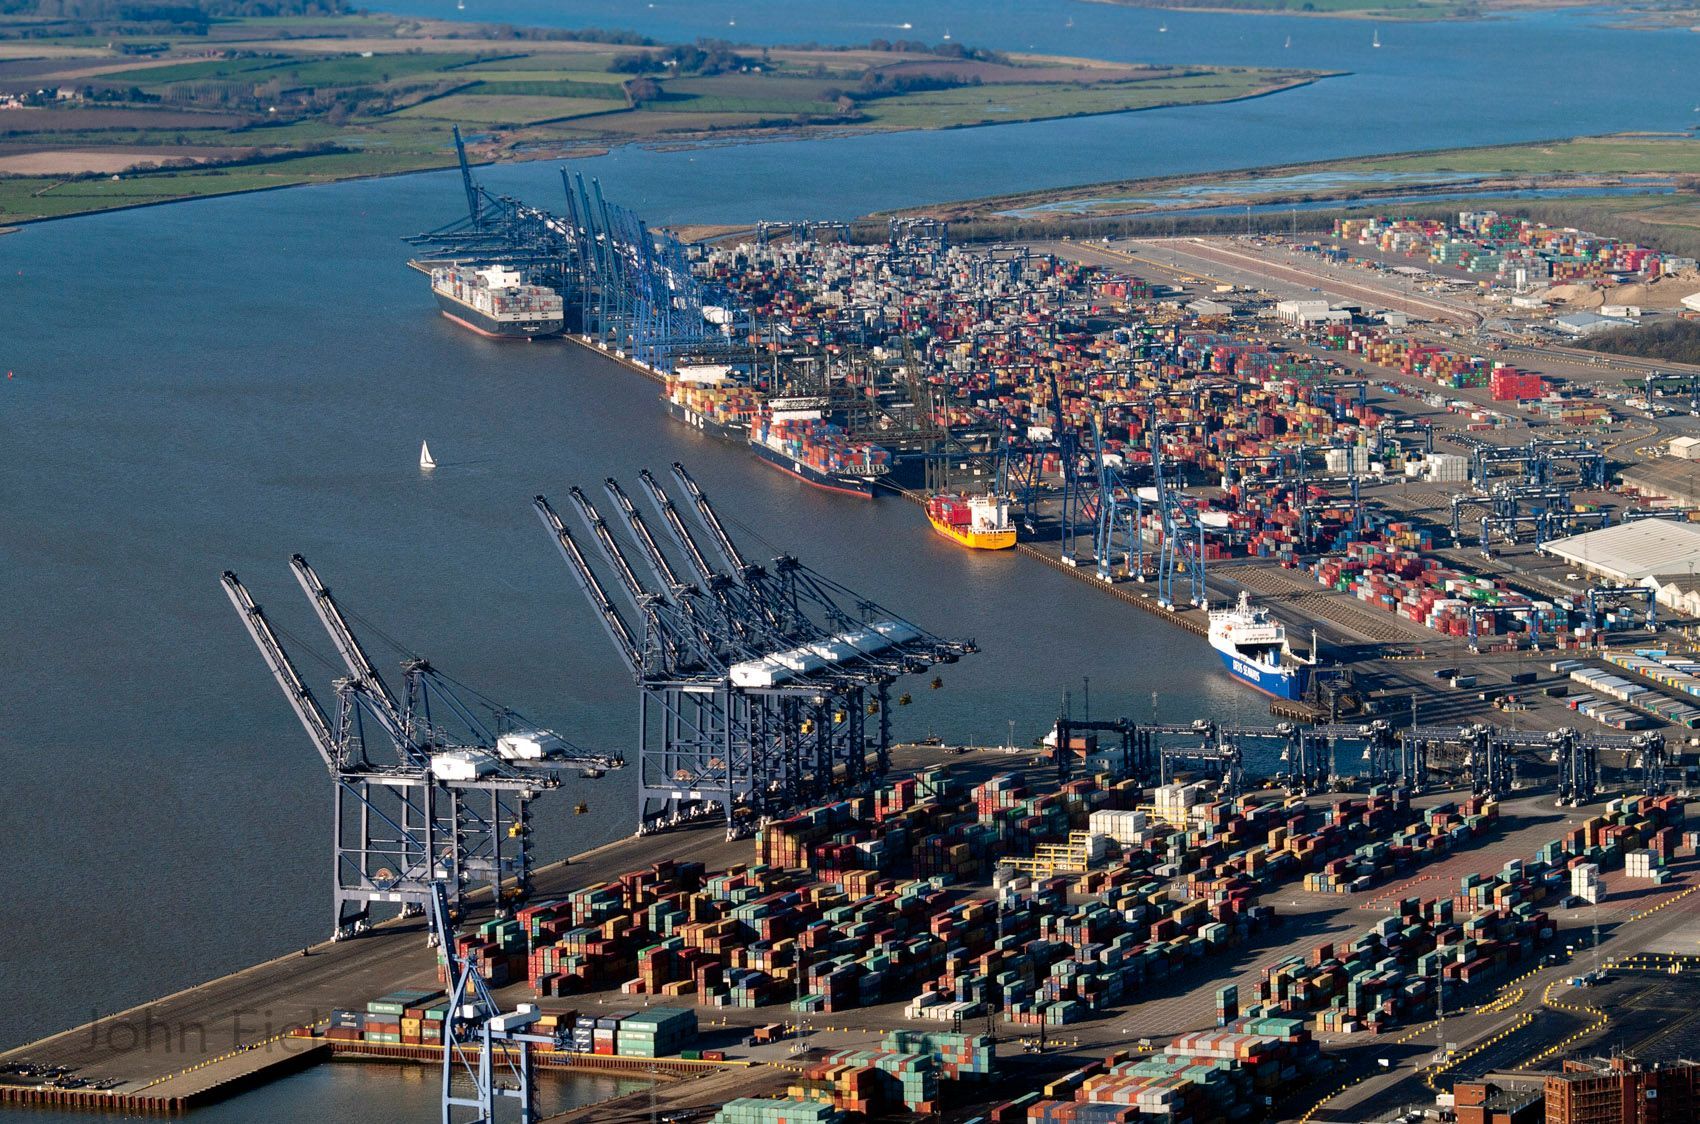 Now Clearing at the Port of Felixstowe